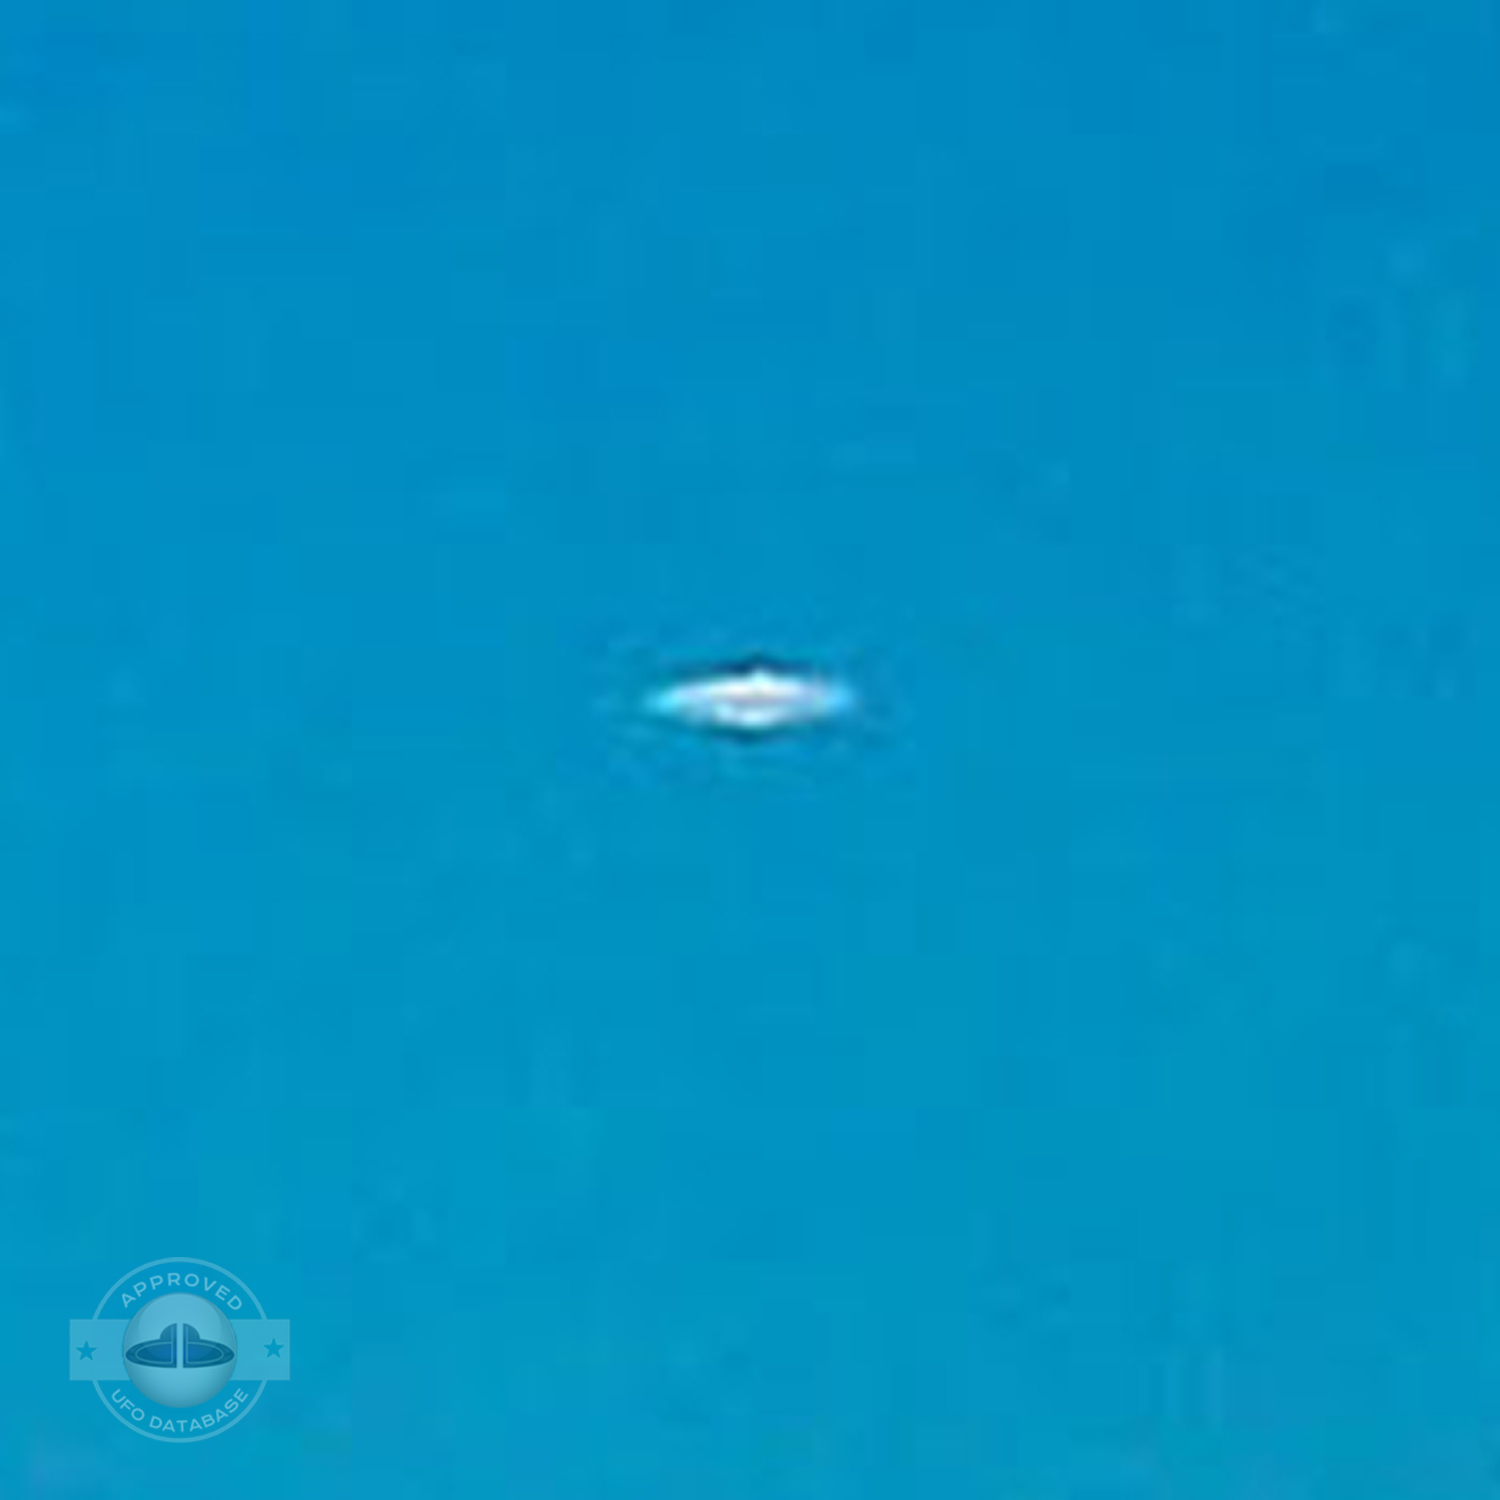 White UFO passing in cloudless turquoise sky over Sao Paulo Brazil UFO Picture #204-3